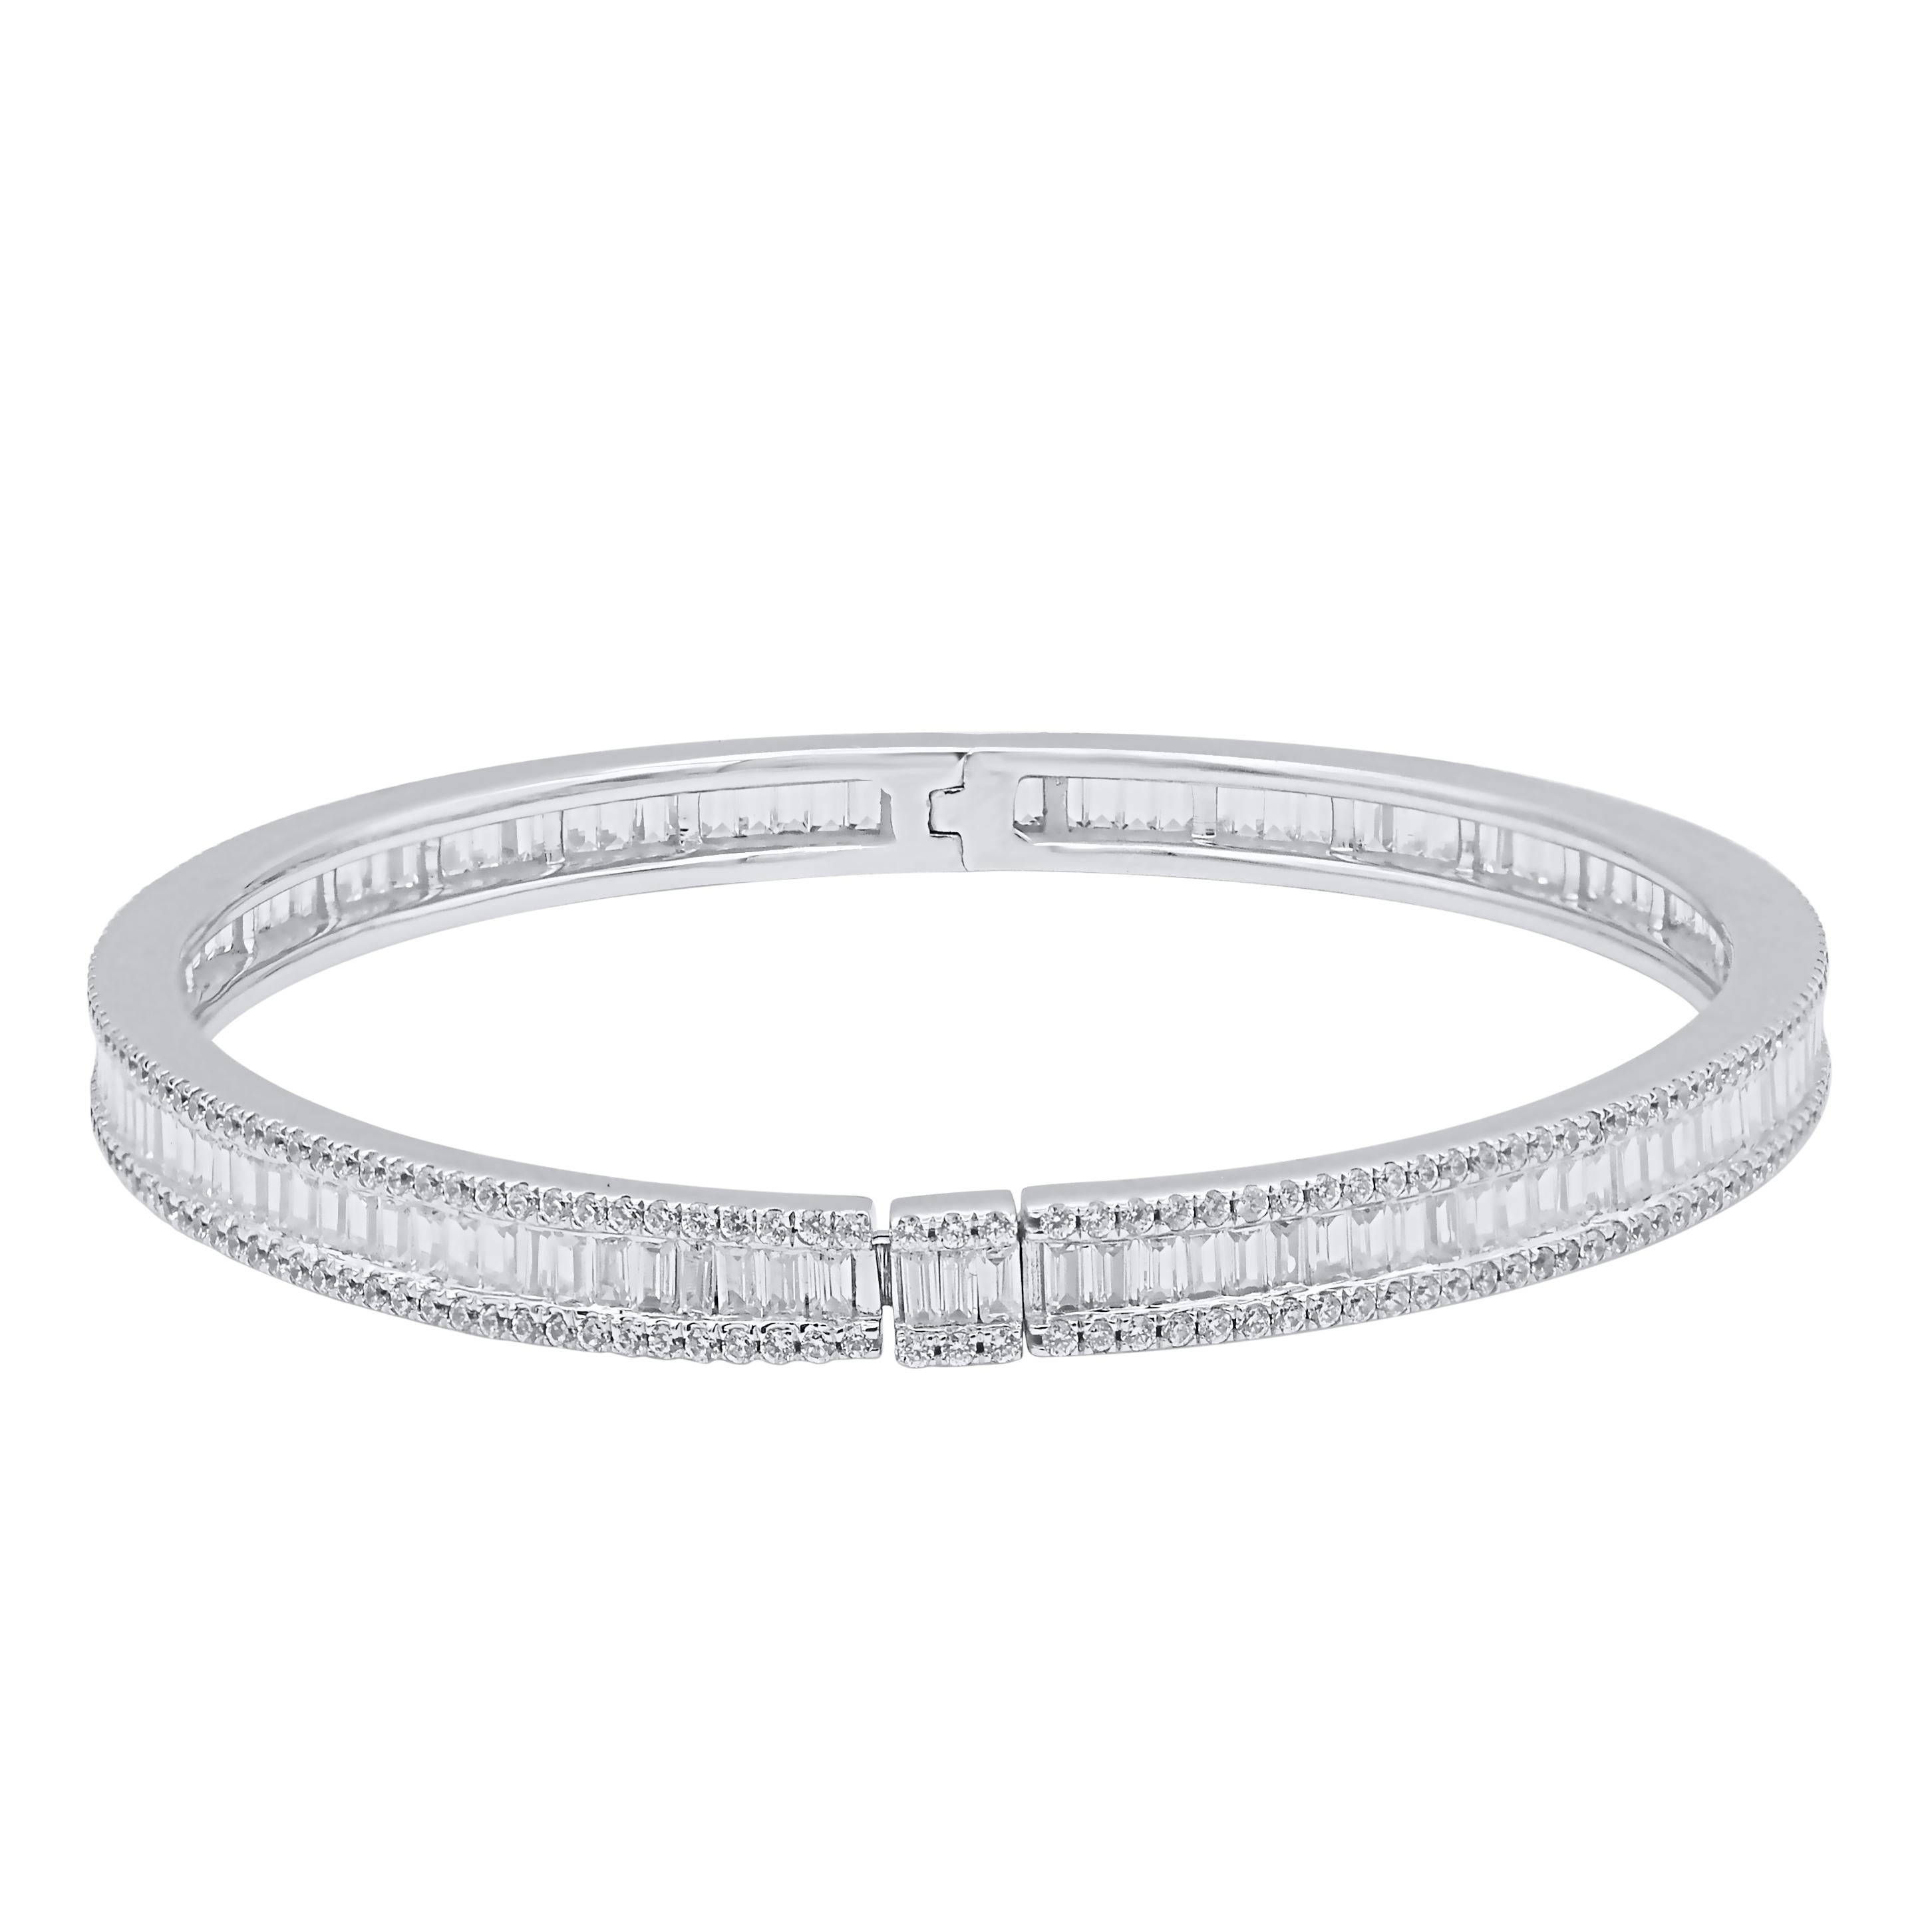 Classic and sophisticated, this diamond bangle bracelet pairs well with any attire.
This Shimmering bangle bracelet features 480 natural round single cut & baguette diamonds in prong and channel setting and crafted in 14kt white gold. Diamonds are